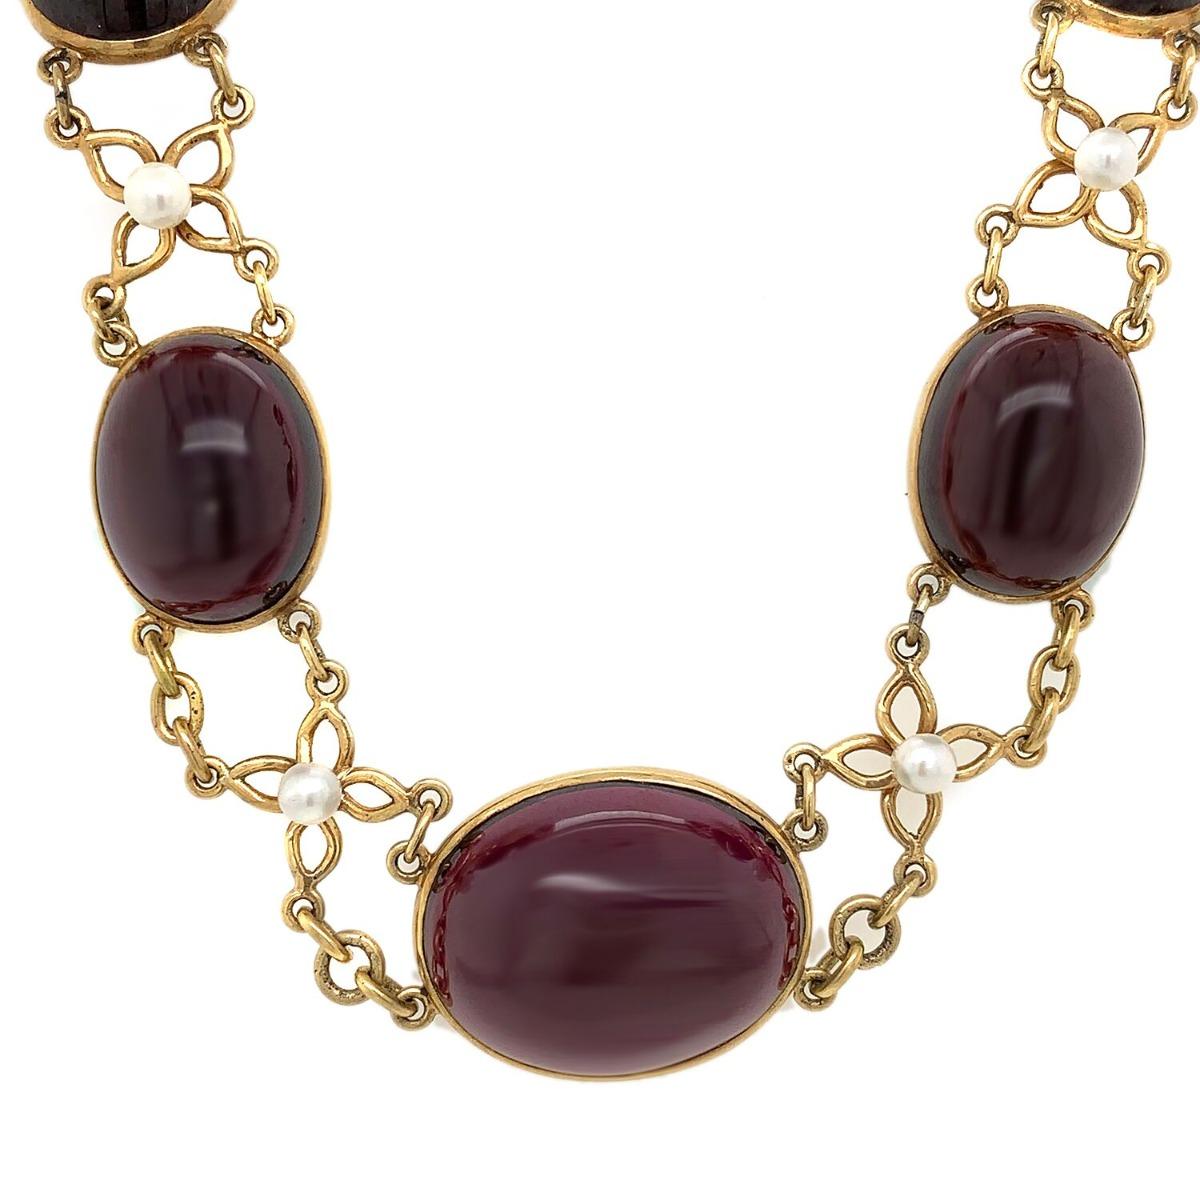 Metal : 14k Yellow Gold
Gemstone: Garnet, Pearl
Total Weight: 62.5 grams
Condition: Excellent
Length: 7.08 inches

SKU#N-01670